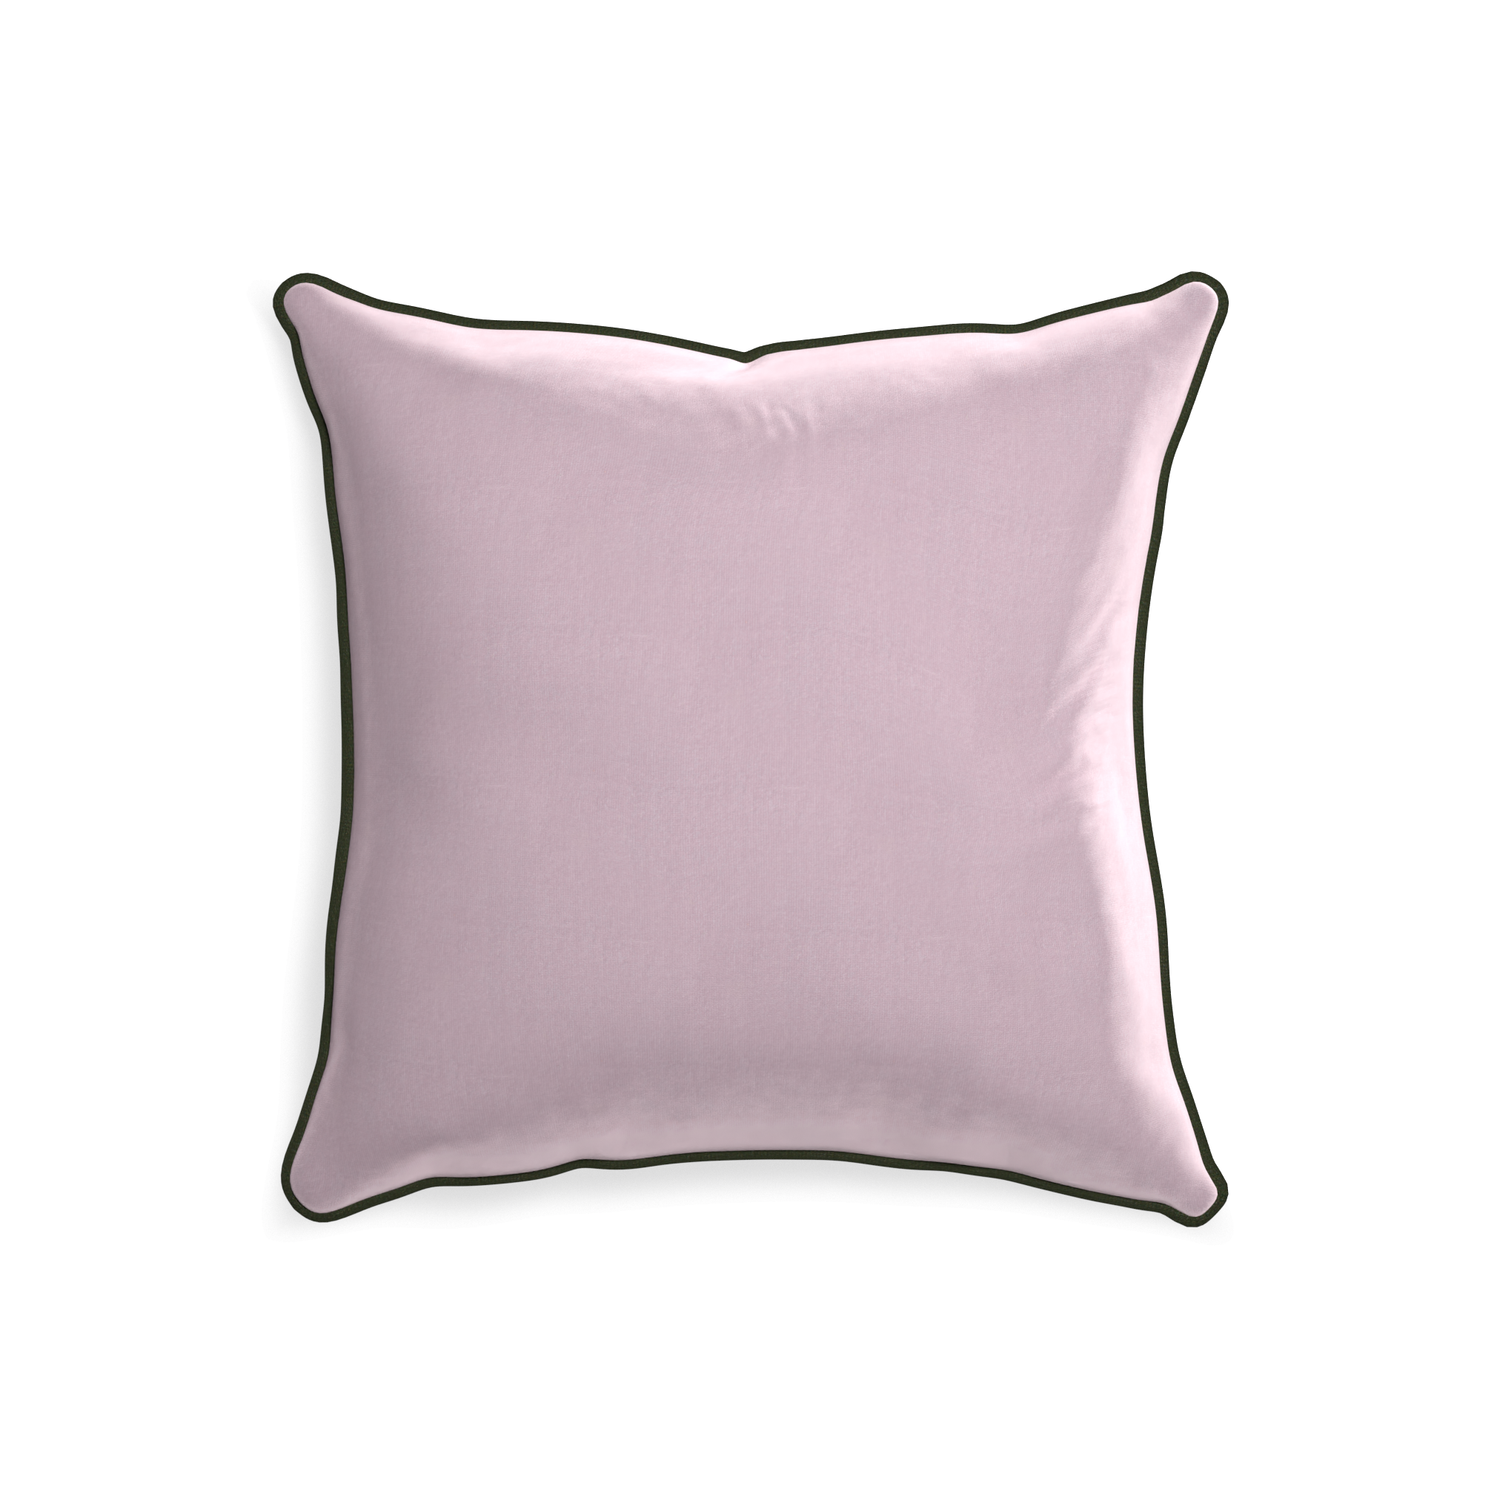 20-square lilac velvet custom pillow with f piping on white background